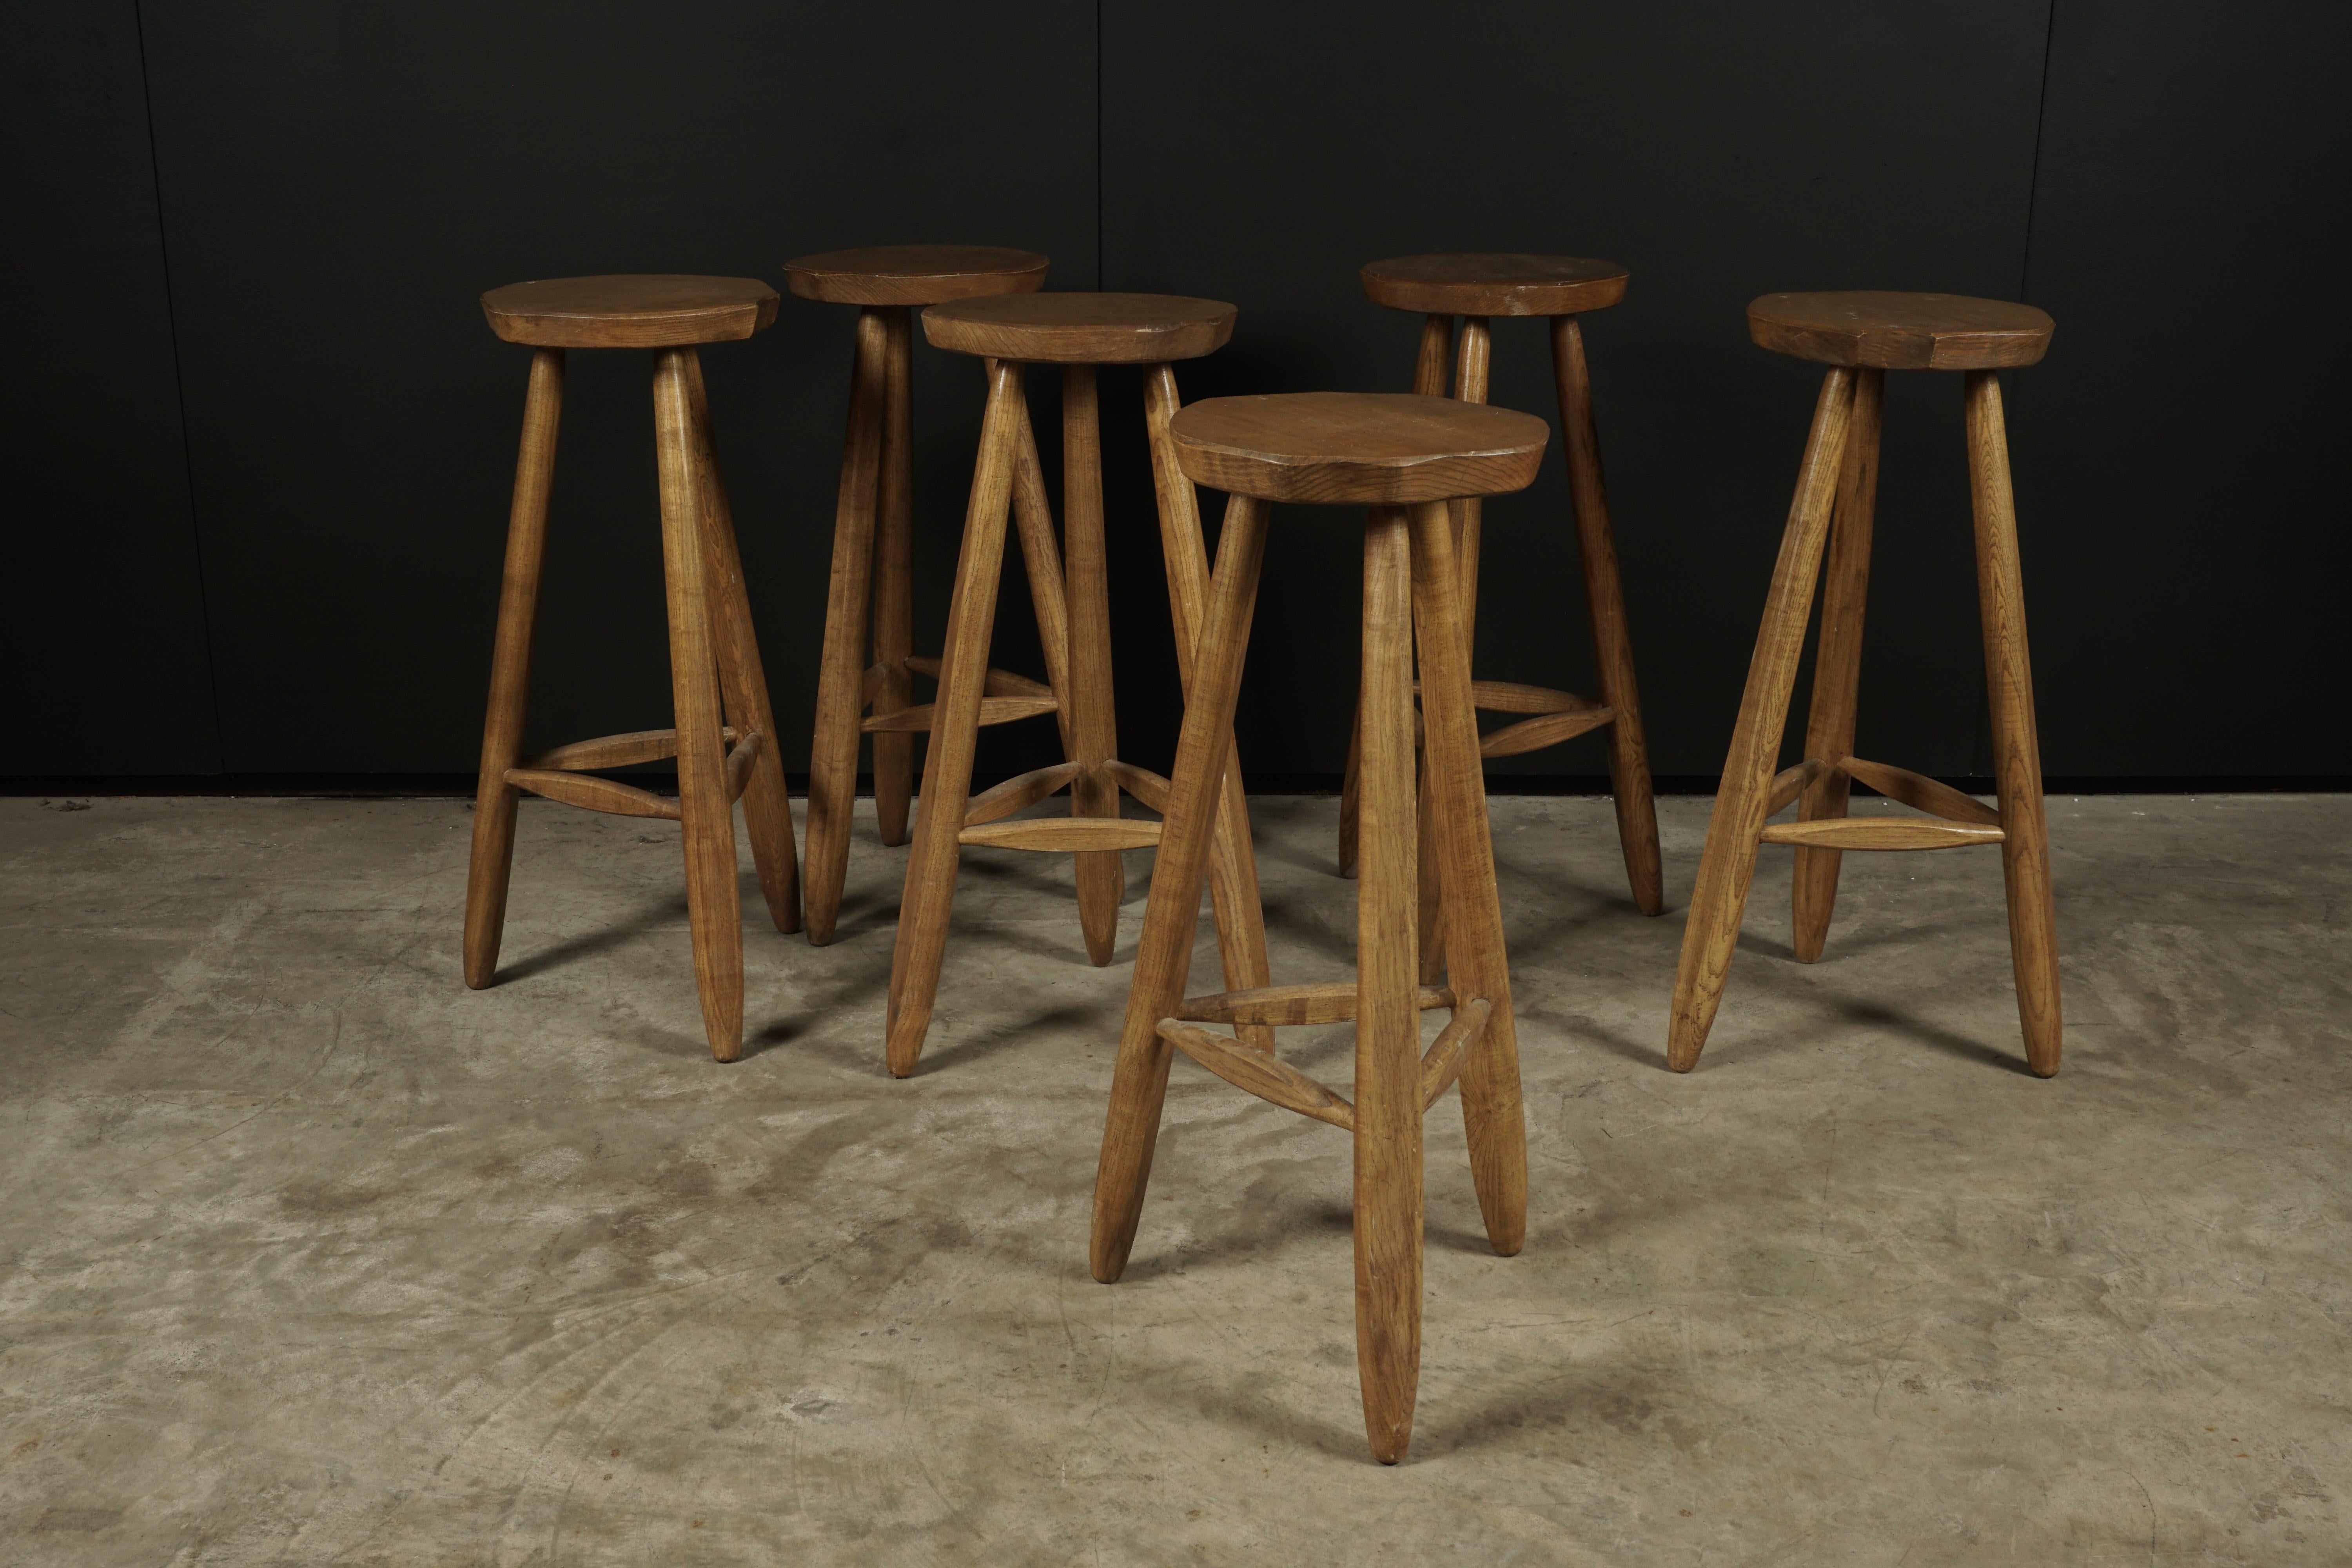 Vintage set of six oak barstools from France, 1970s. Solid oak construction with light wear and patina.